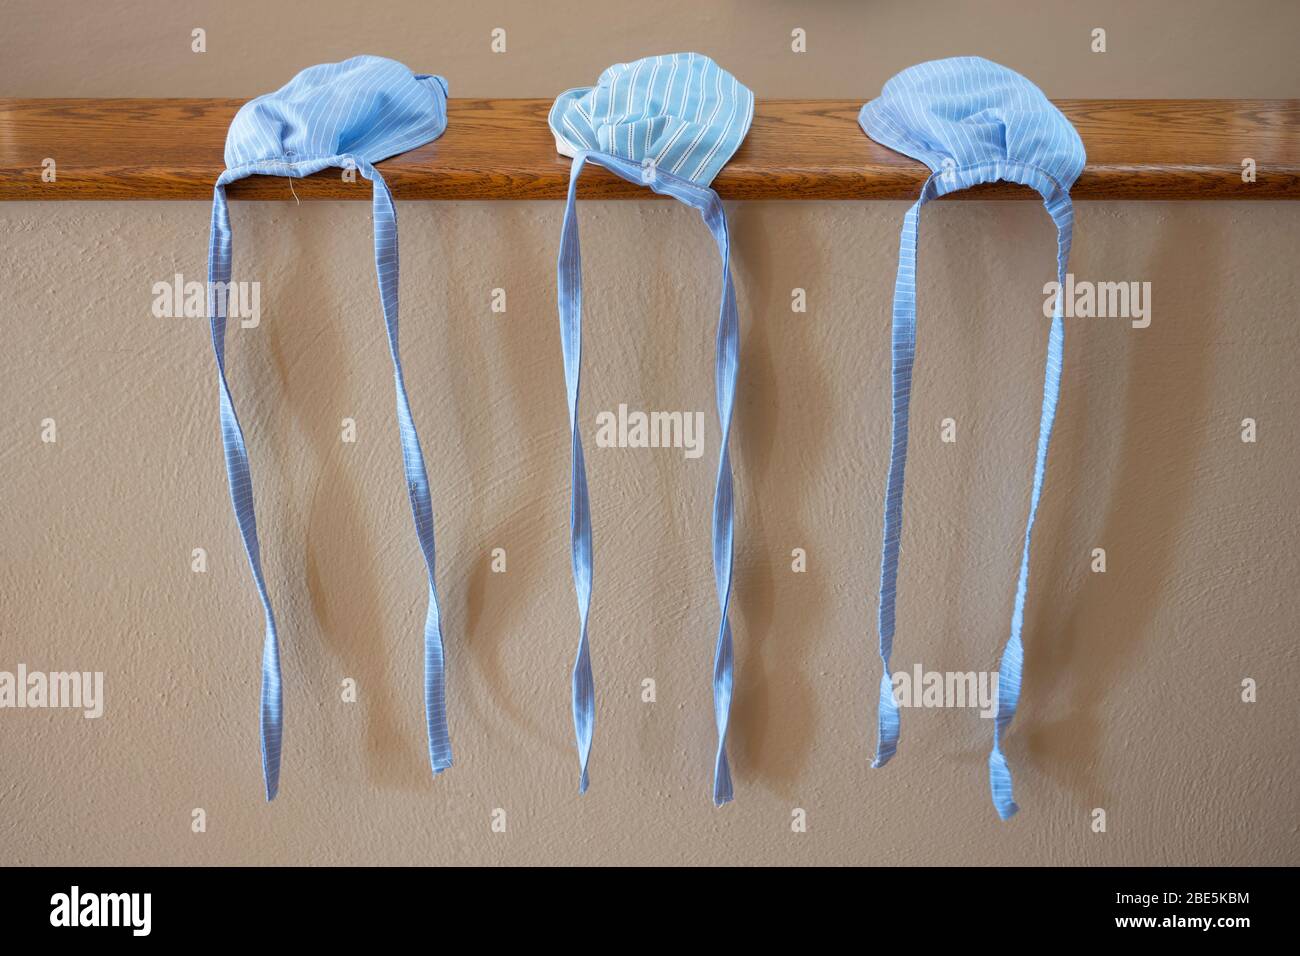 A close-up of three, hand-sewn face masks that were made from blue striped cotton cloth, without elastic-bands, to help prevent the spread of the COVI Stock Photo